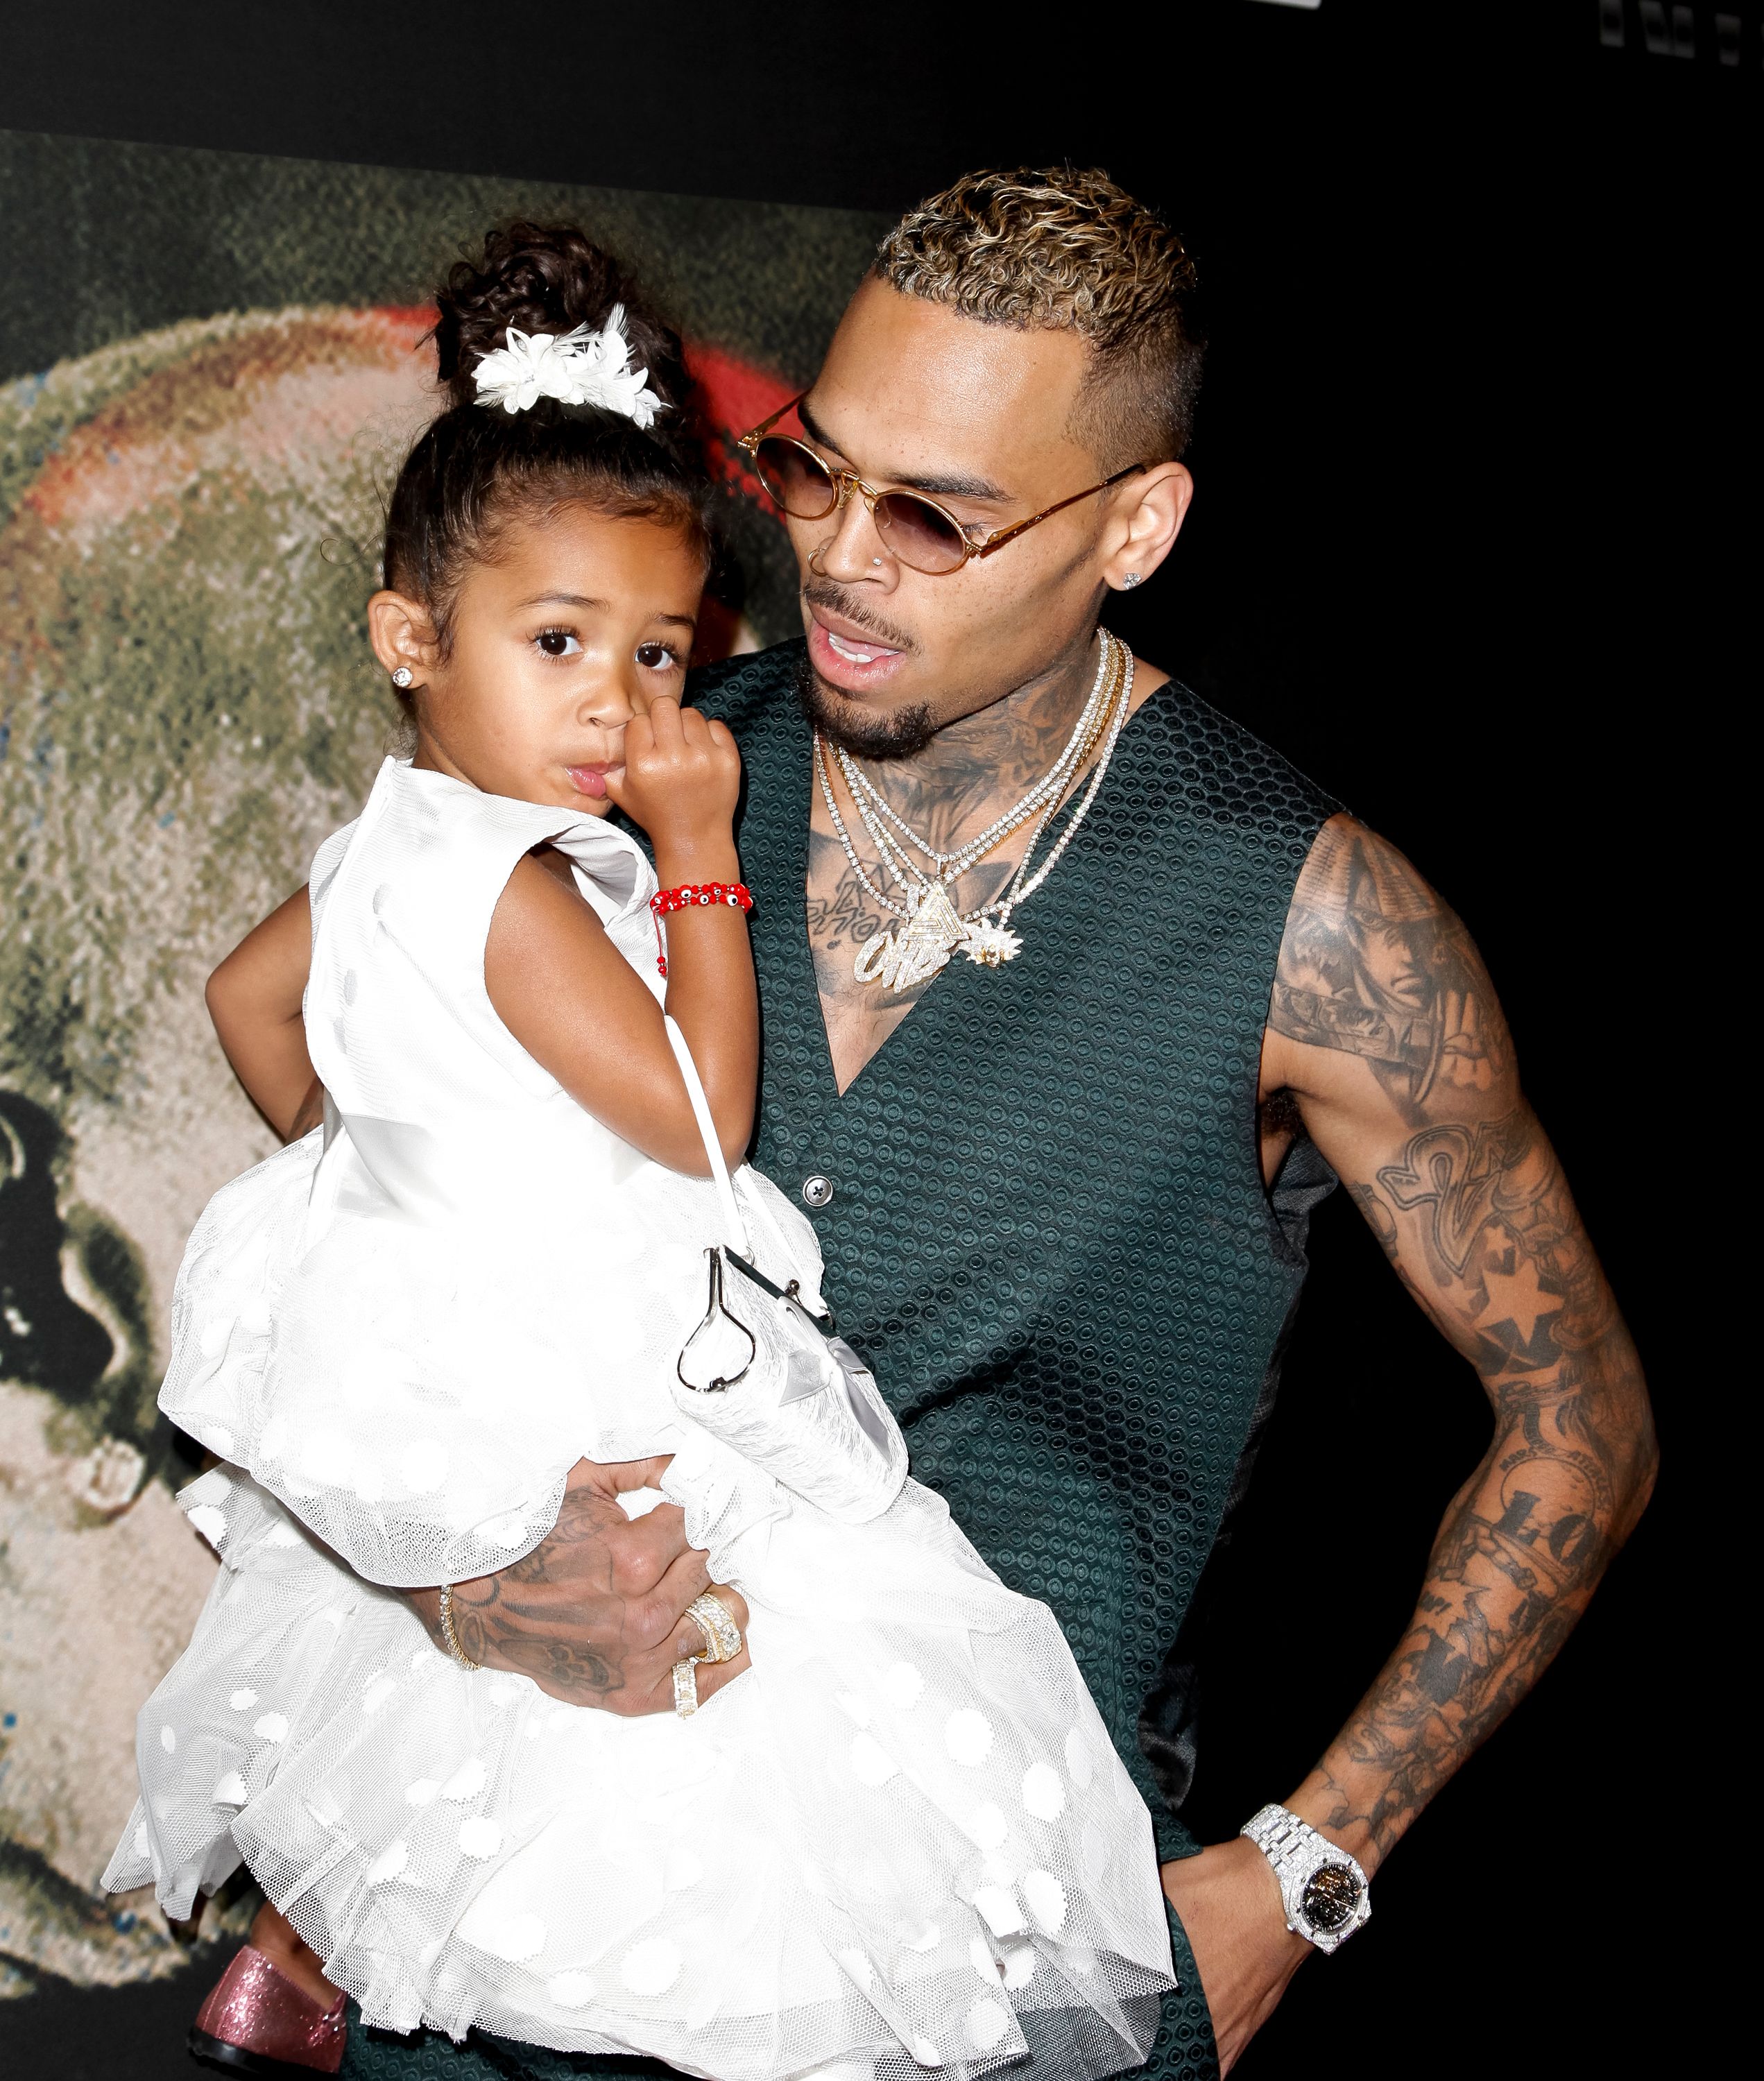 Royalty Brown and Chris Brown attend the premiere of Fathom Events 'Chris Brown: Welcome To My Life' at Regal LA Live Stadium 14 on June 6, 2017 in Los Angeles, California. | Source: Getty Images